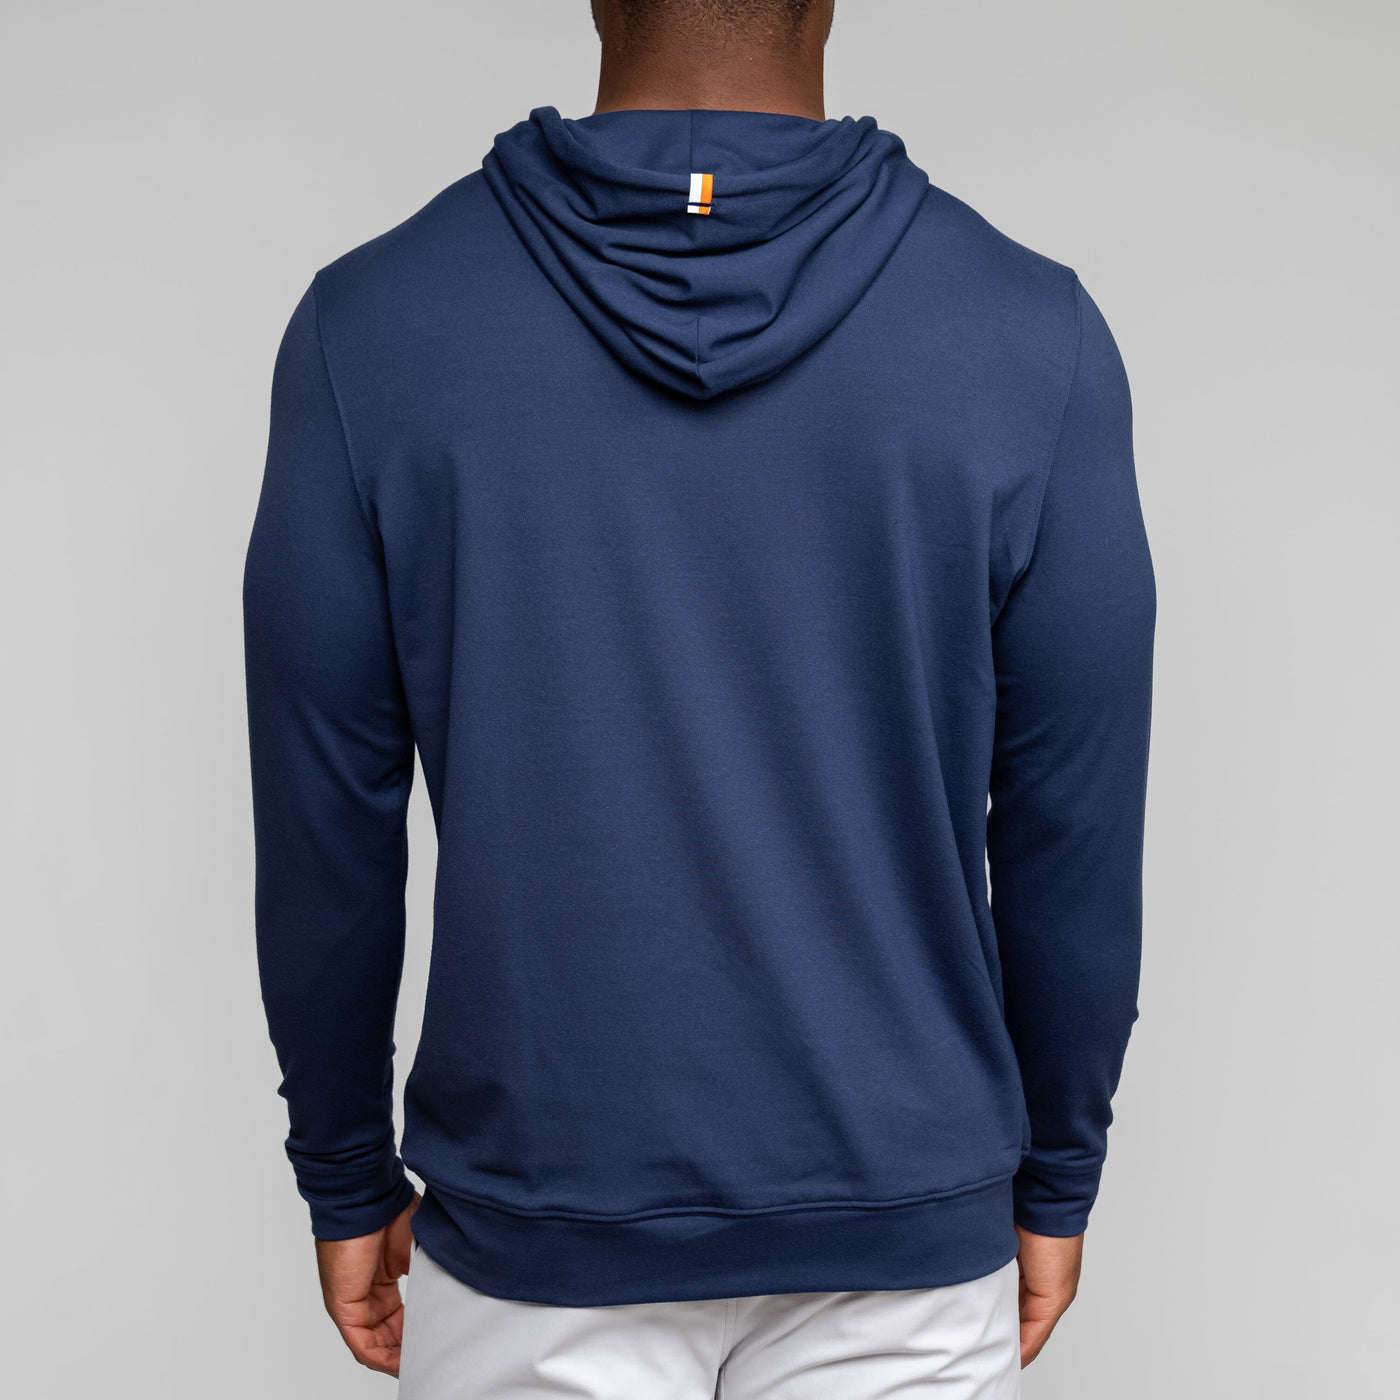 The Grounds Hoodie